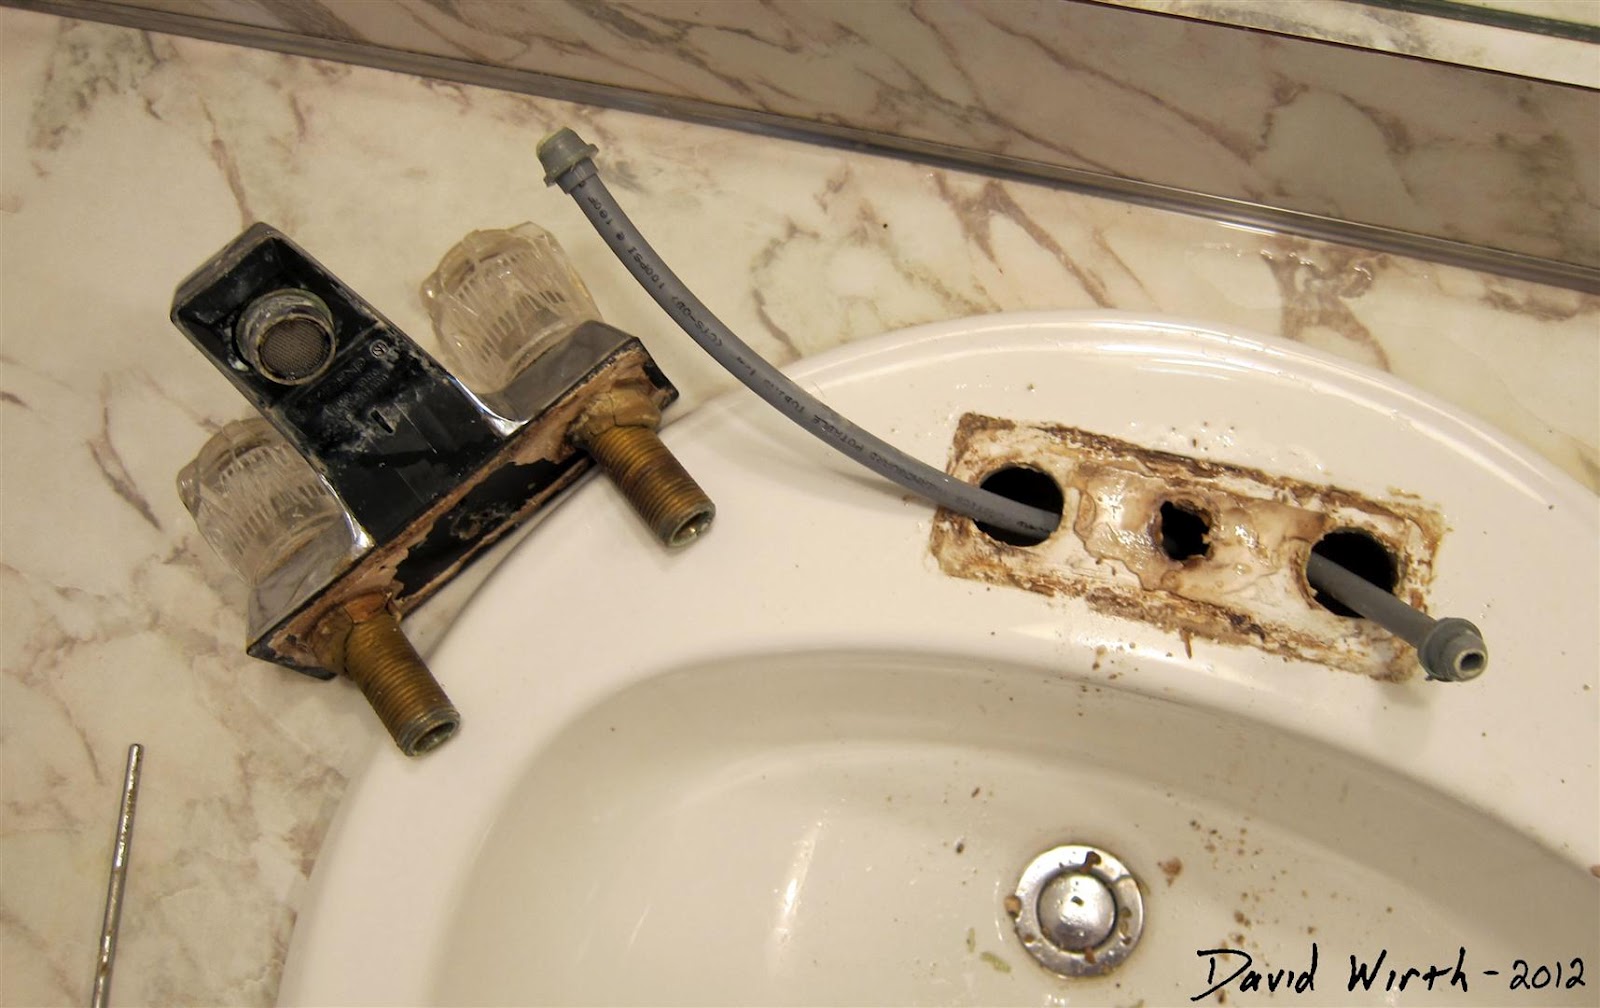 How To Install Bathtub Faucet Valve [] Home Improvement